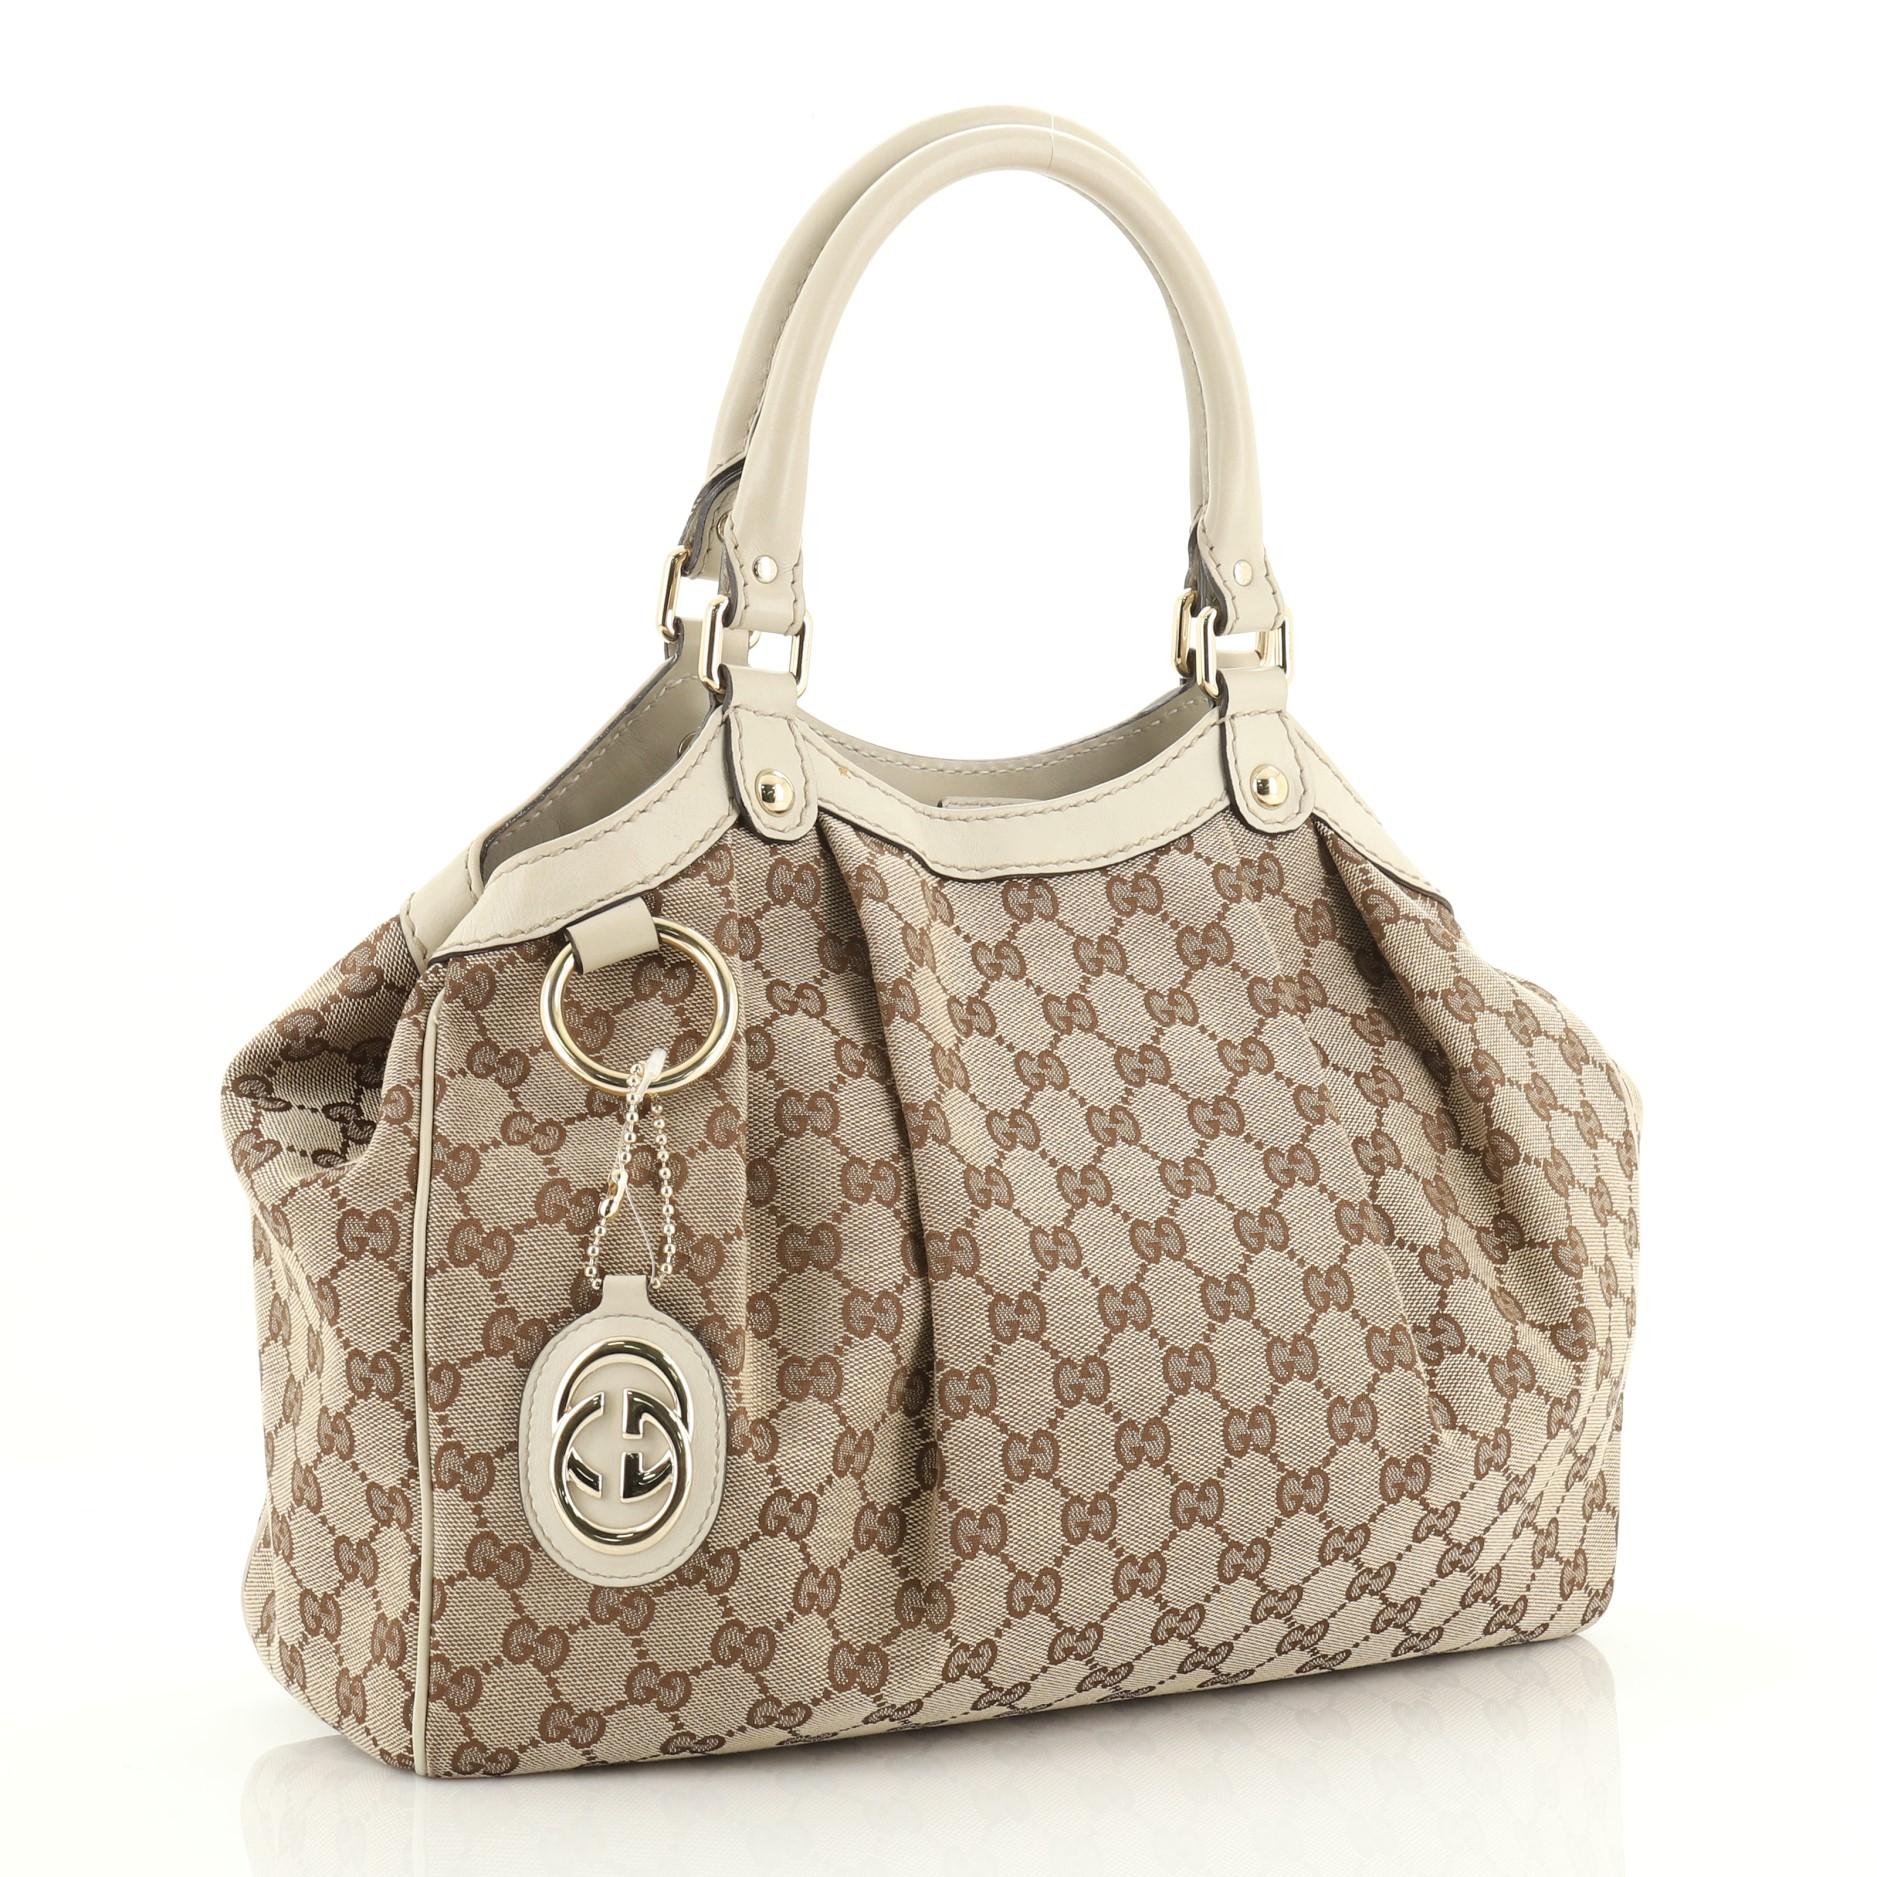 This Gucci Sukey Tote GG Canvas Medium, crafted from brown GG canvas, features dual rolled leather handles, leather trim, and gold-tone hardware. Its magnetic snap closure opens to a brown fabric interior with side zip pocket. 

Estimated Retail